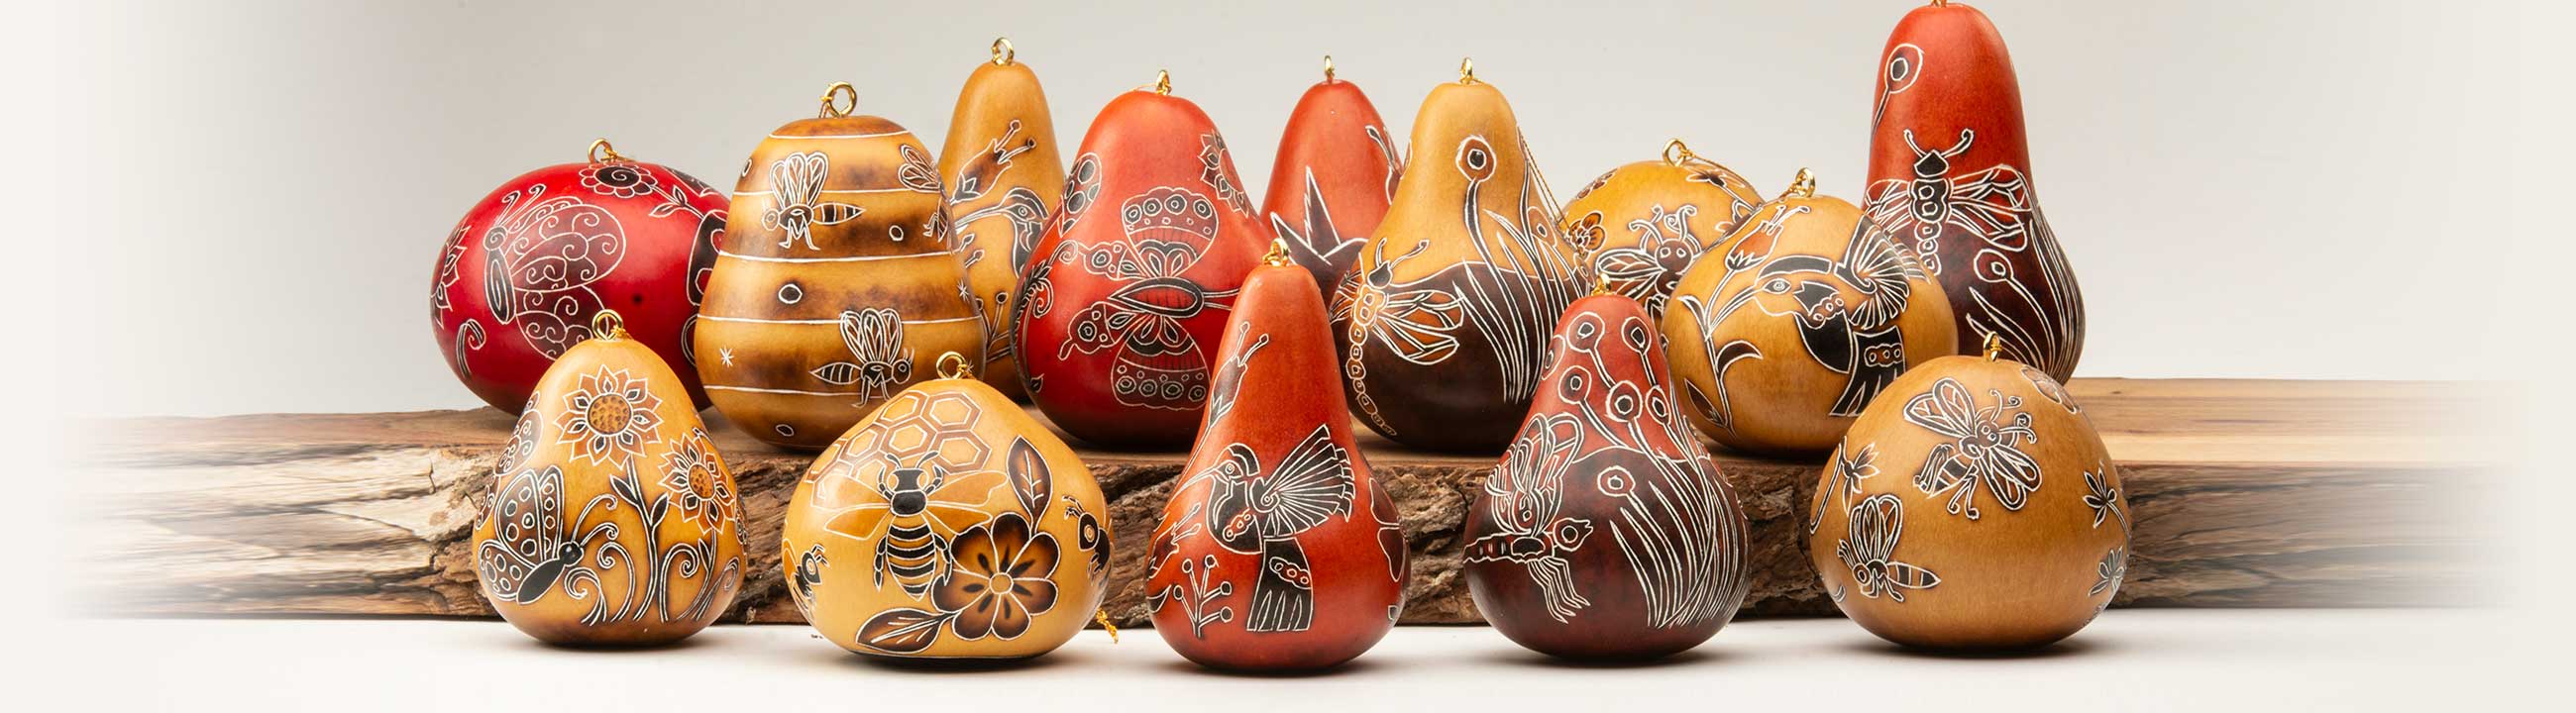 nature gourd ornaments